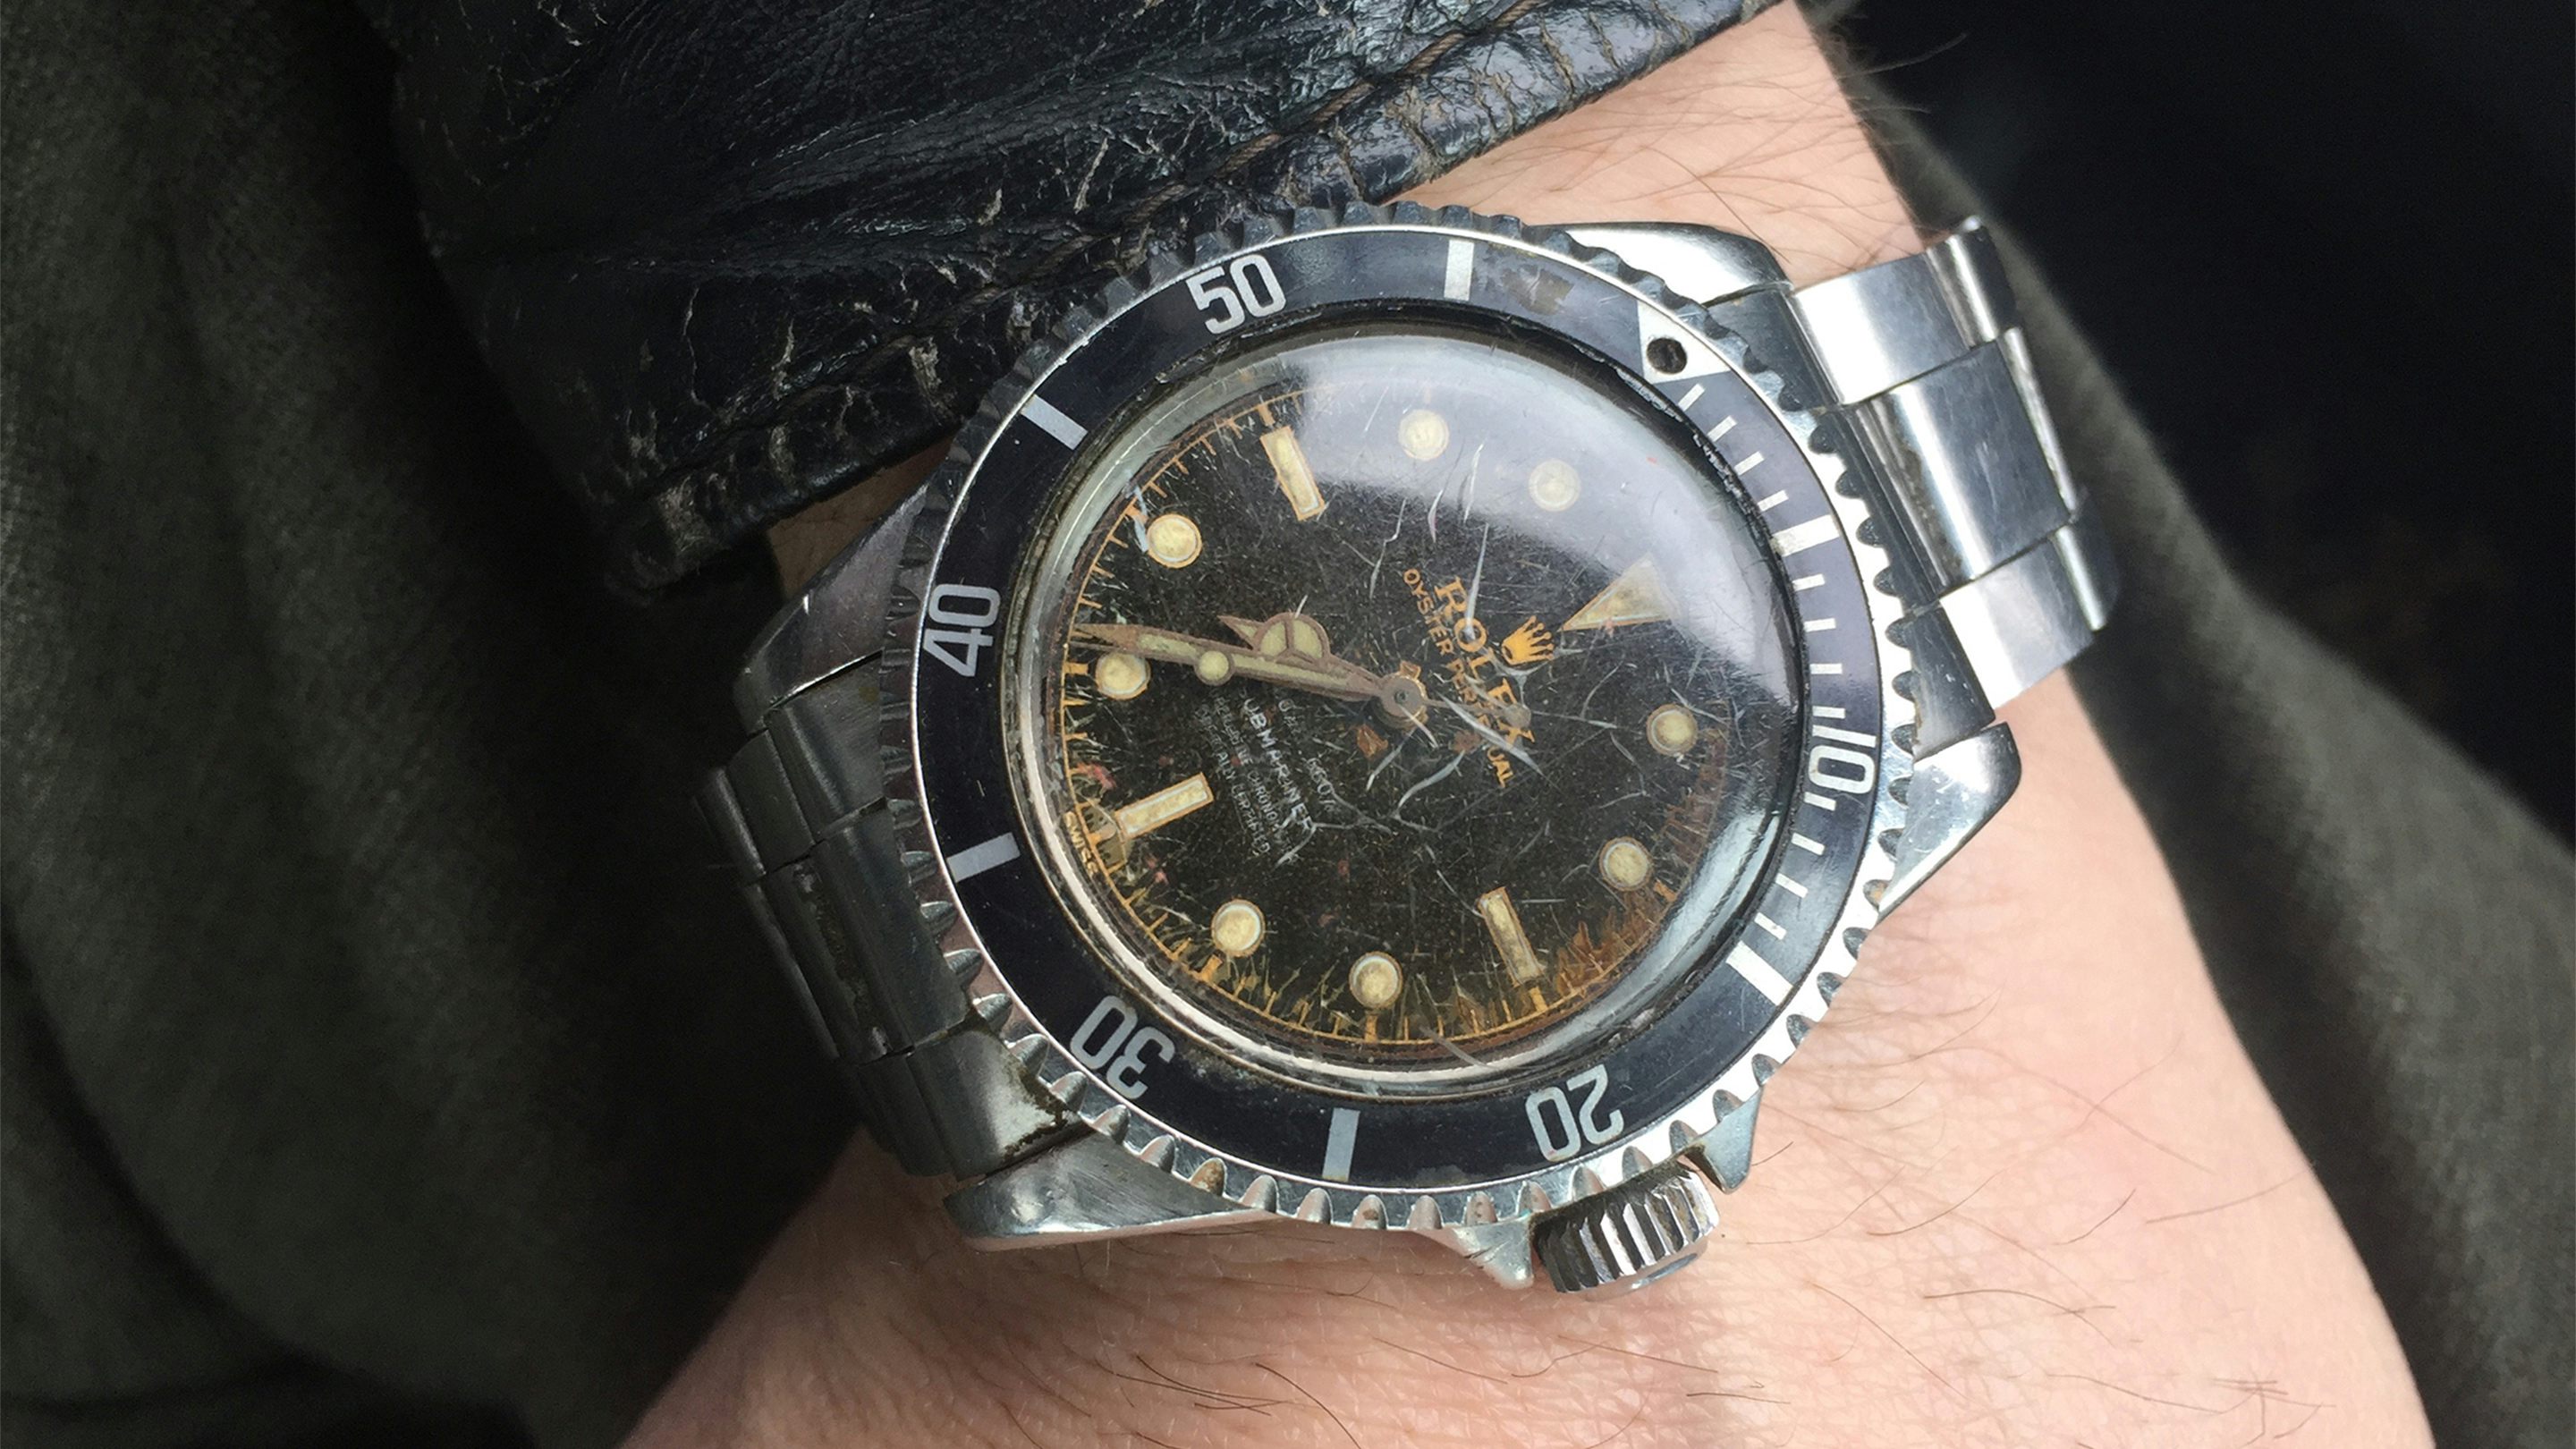 A Gilt Rolex Submariner Reference 5512 -